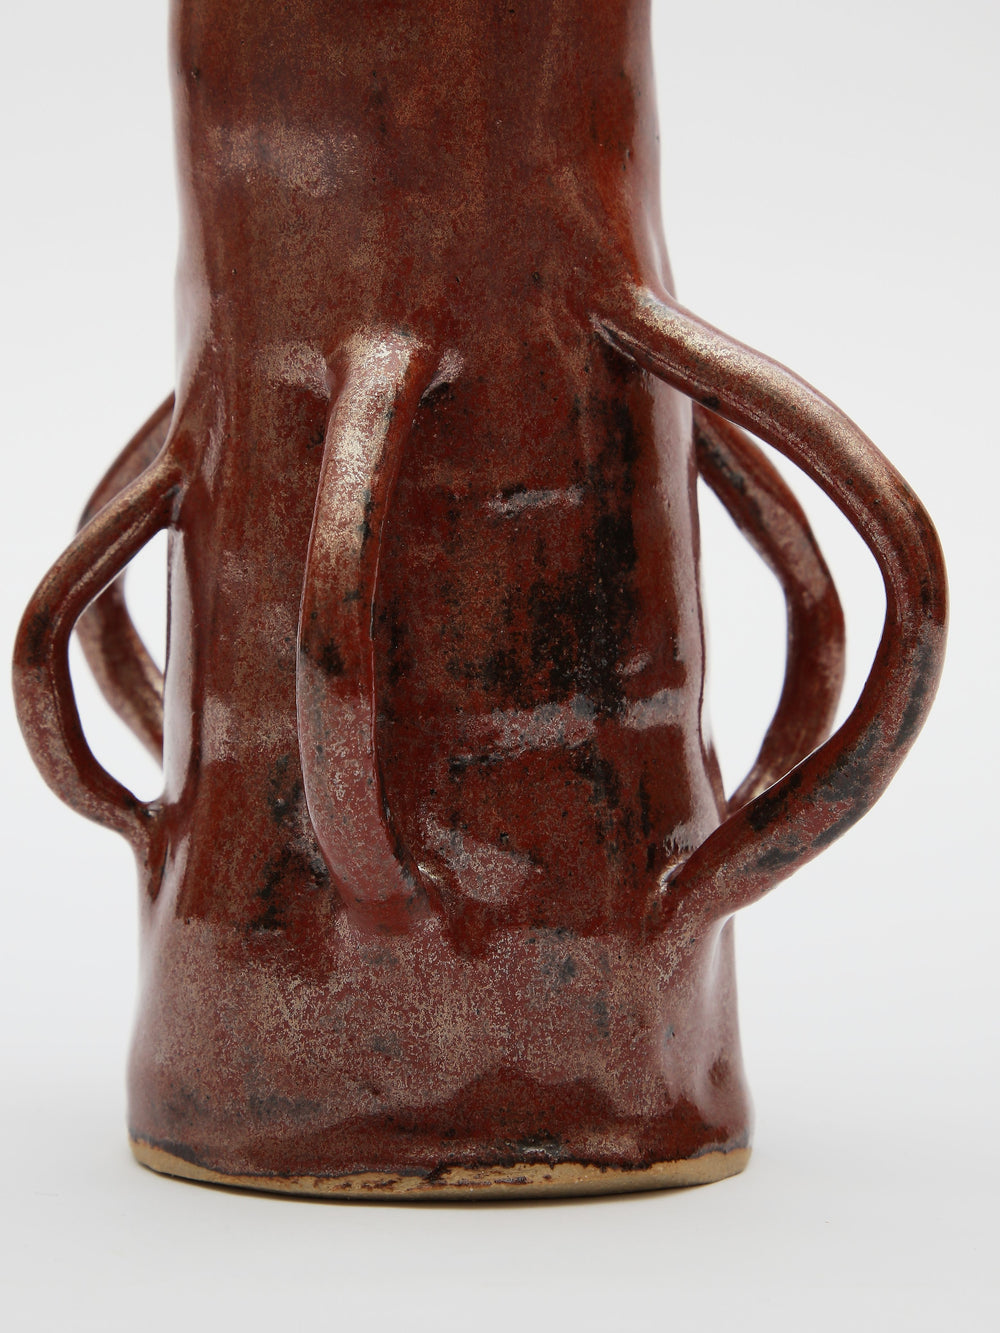 A tall skinny brown vase with handles made by independent artist Gwynnie Gaunt